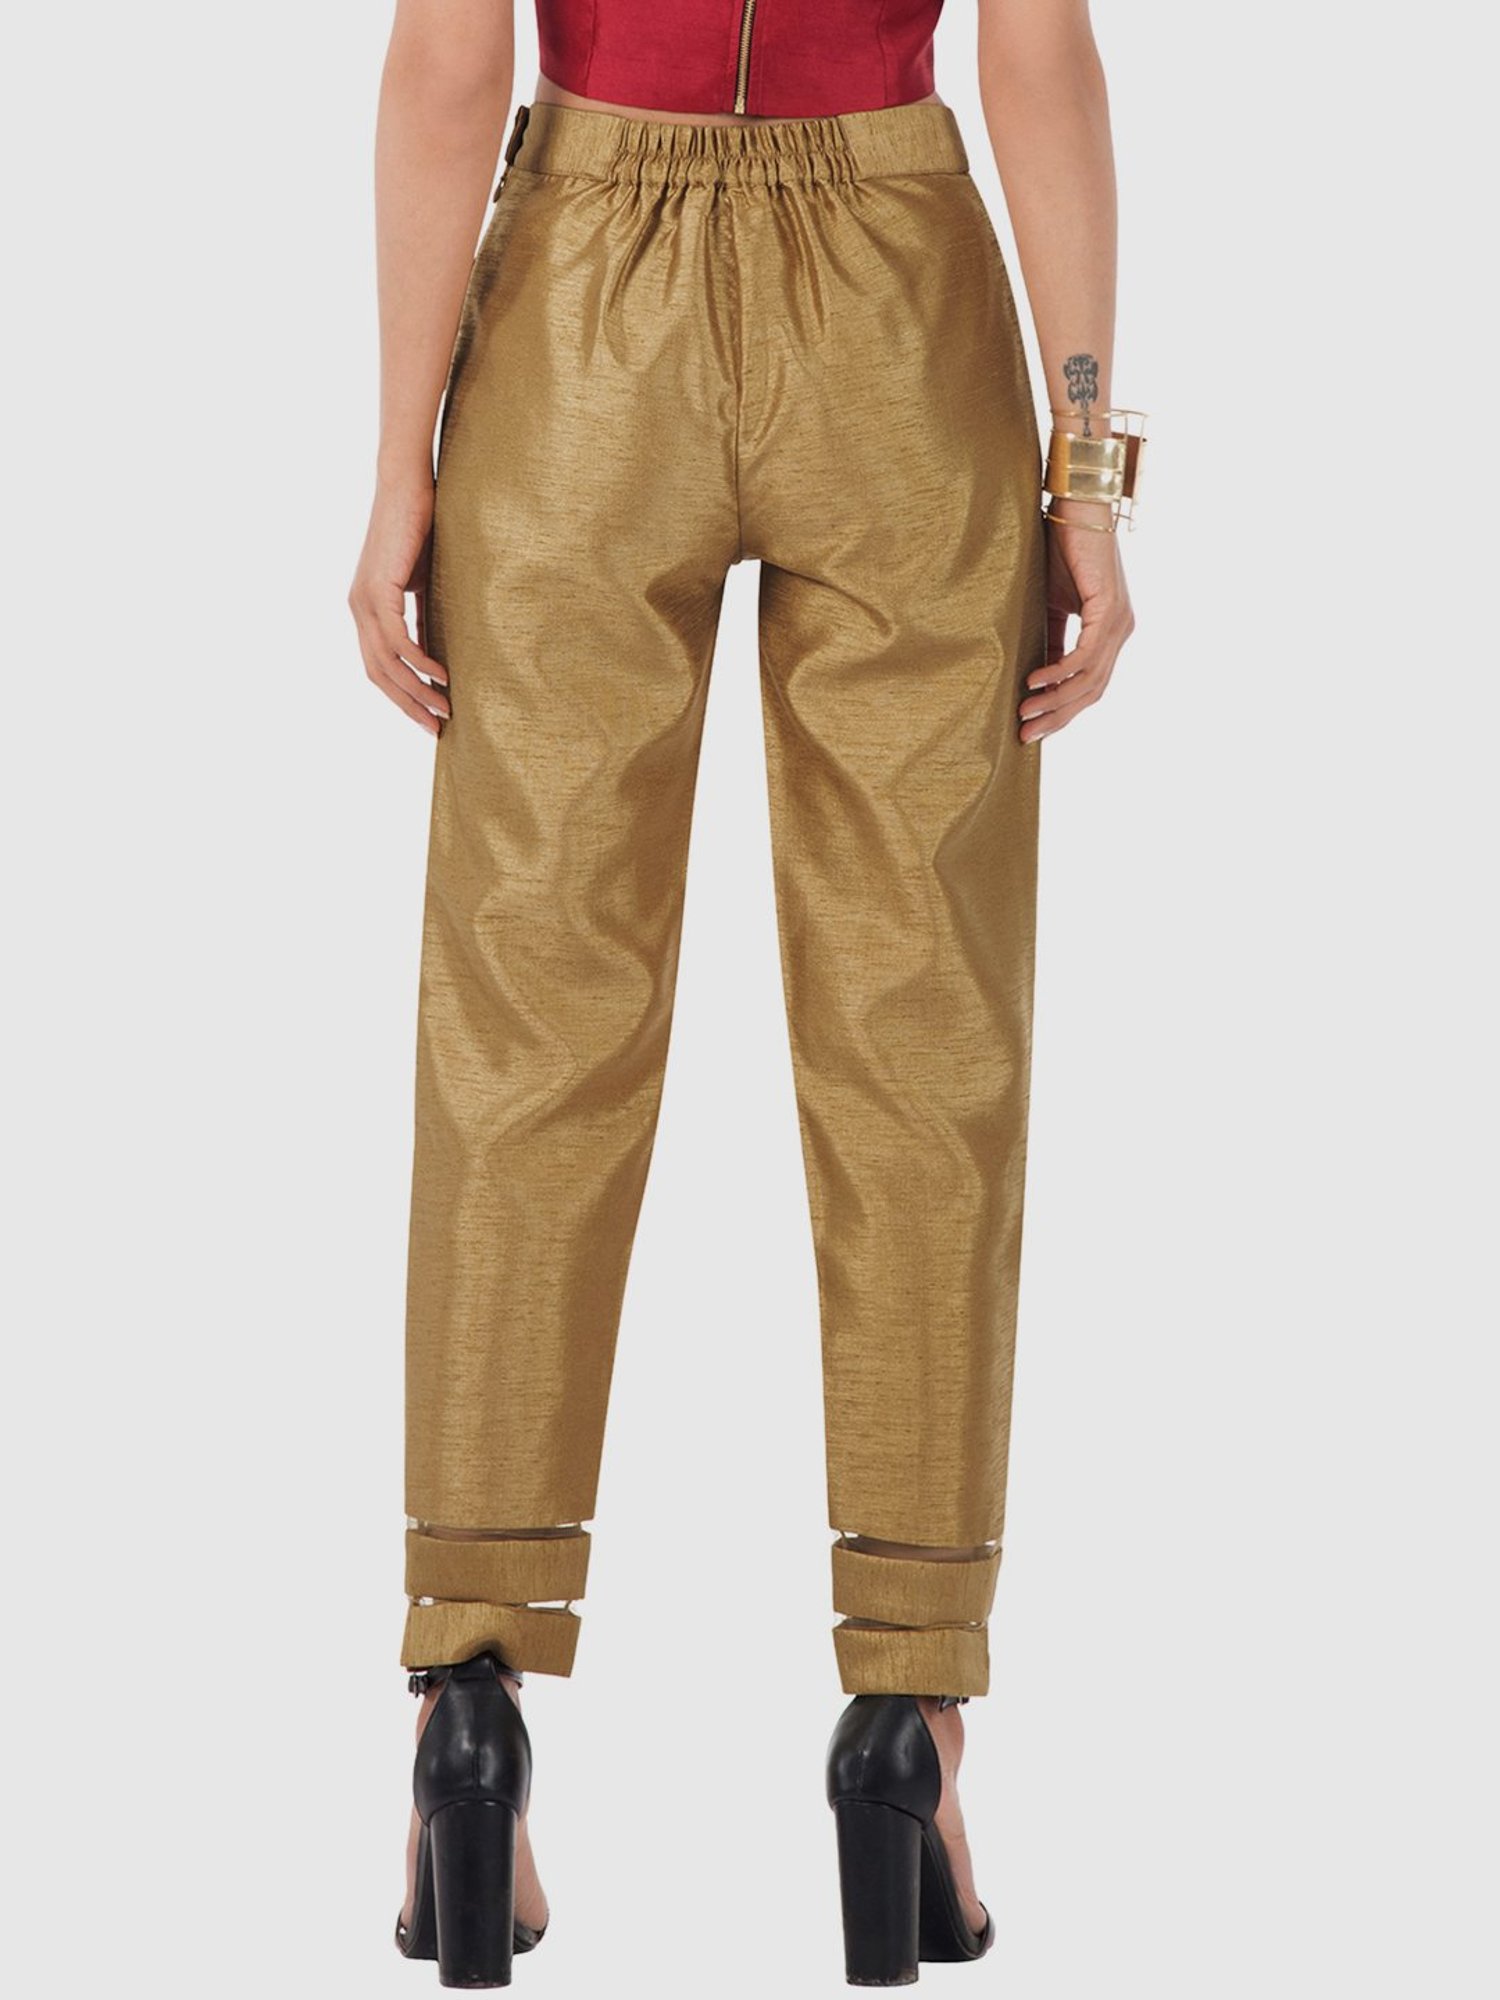 Buy INDYA Gold Toned Silk Cigarette Trousers - Trousers for Women 1839927 |  Myntra